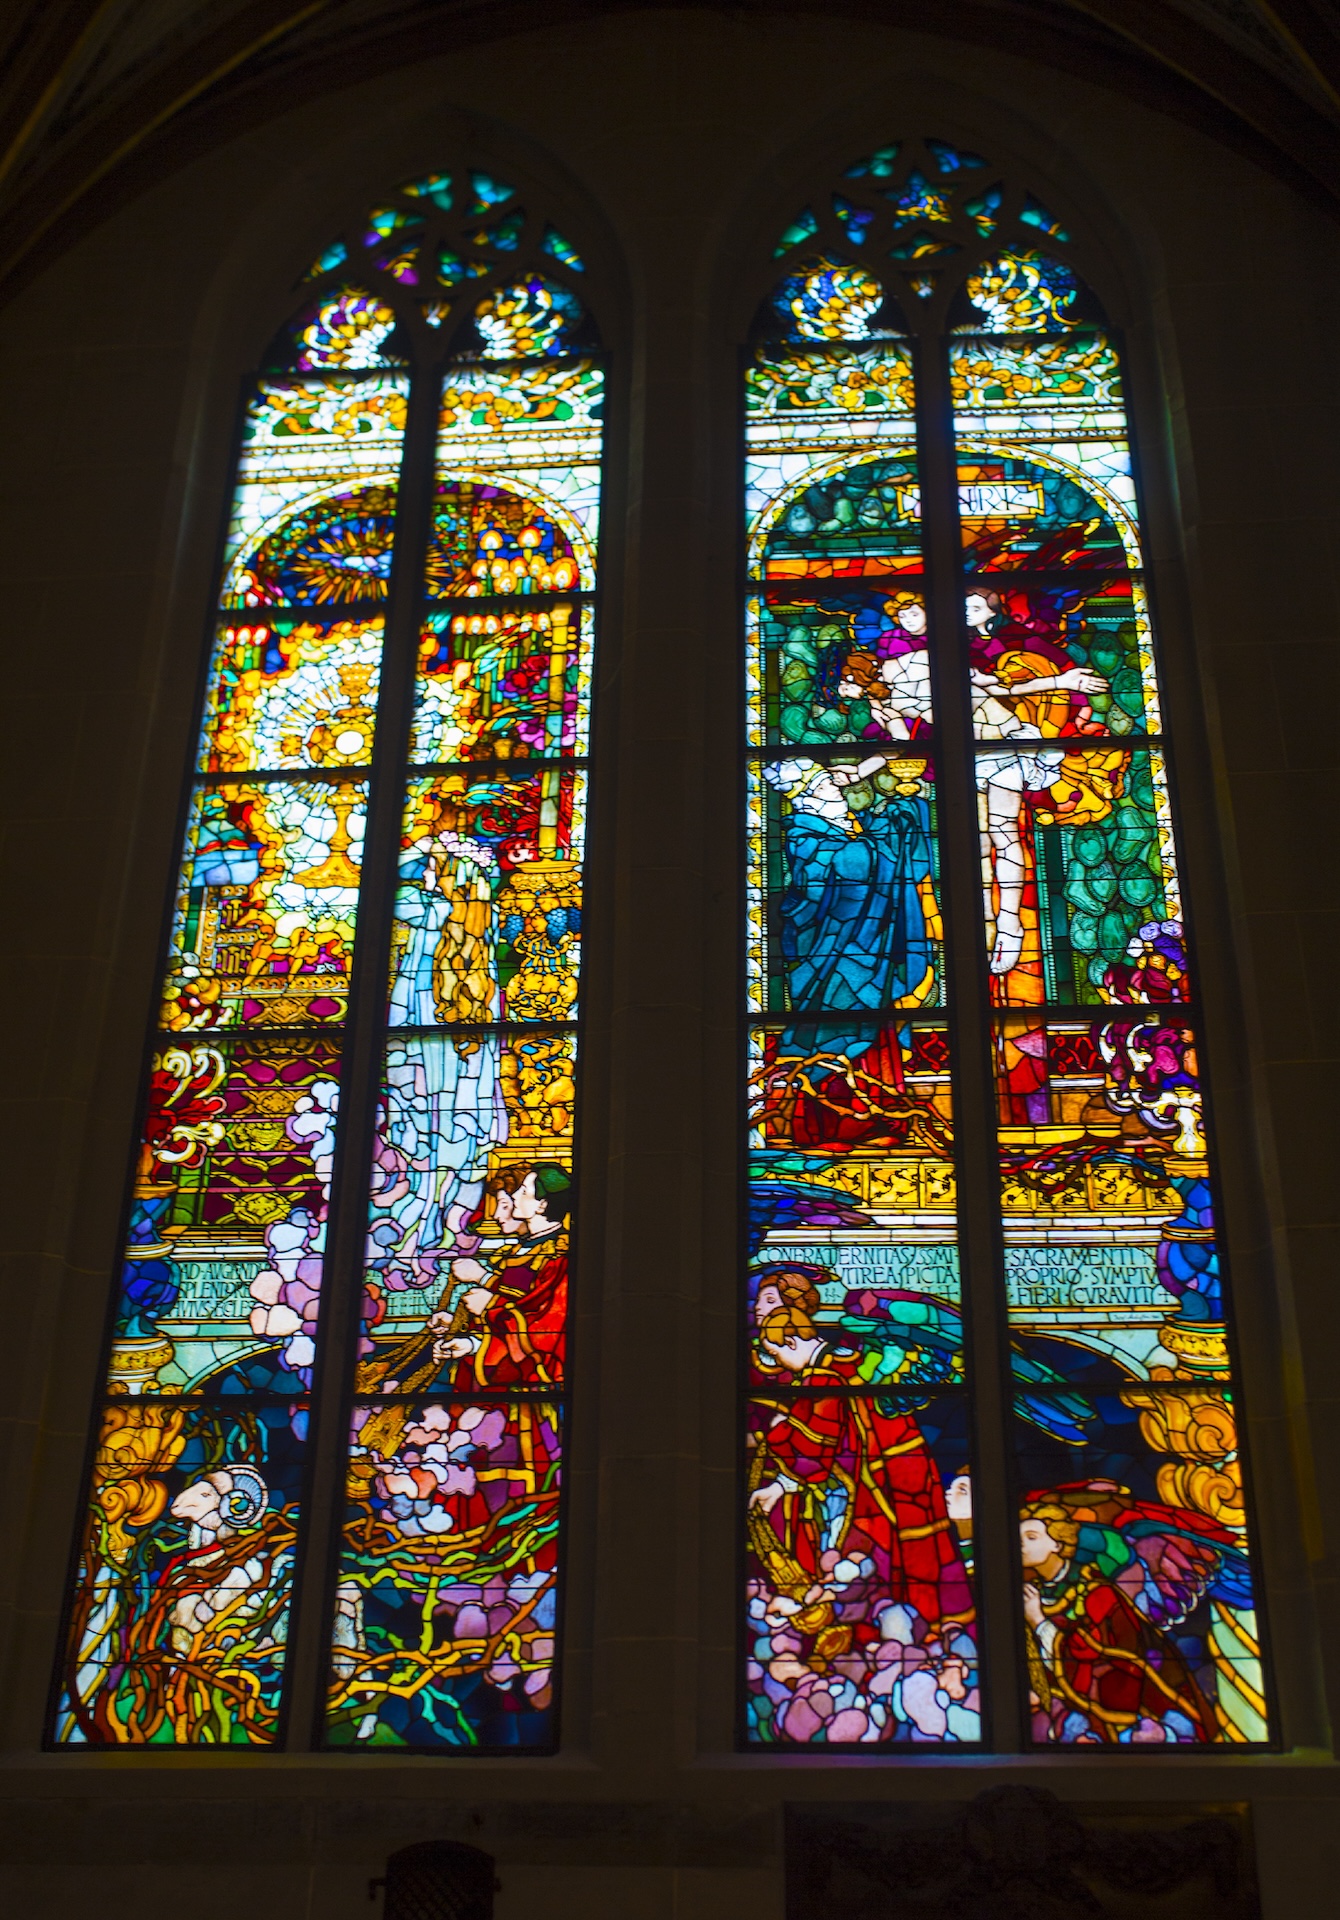 Joseph Mehoffer's stained glass window "The Blessed Sacrament" in Freiburg Cathedral, Switzerland